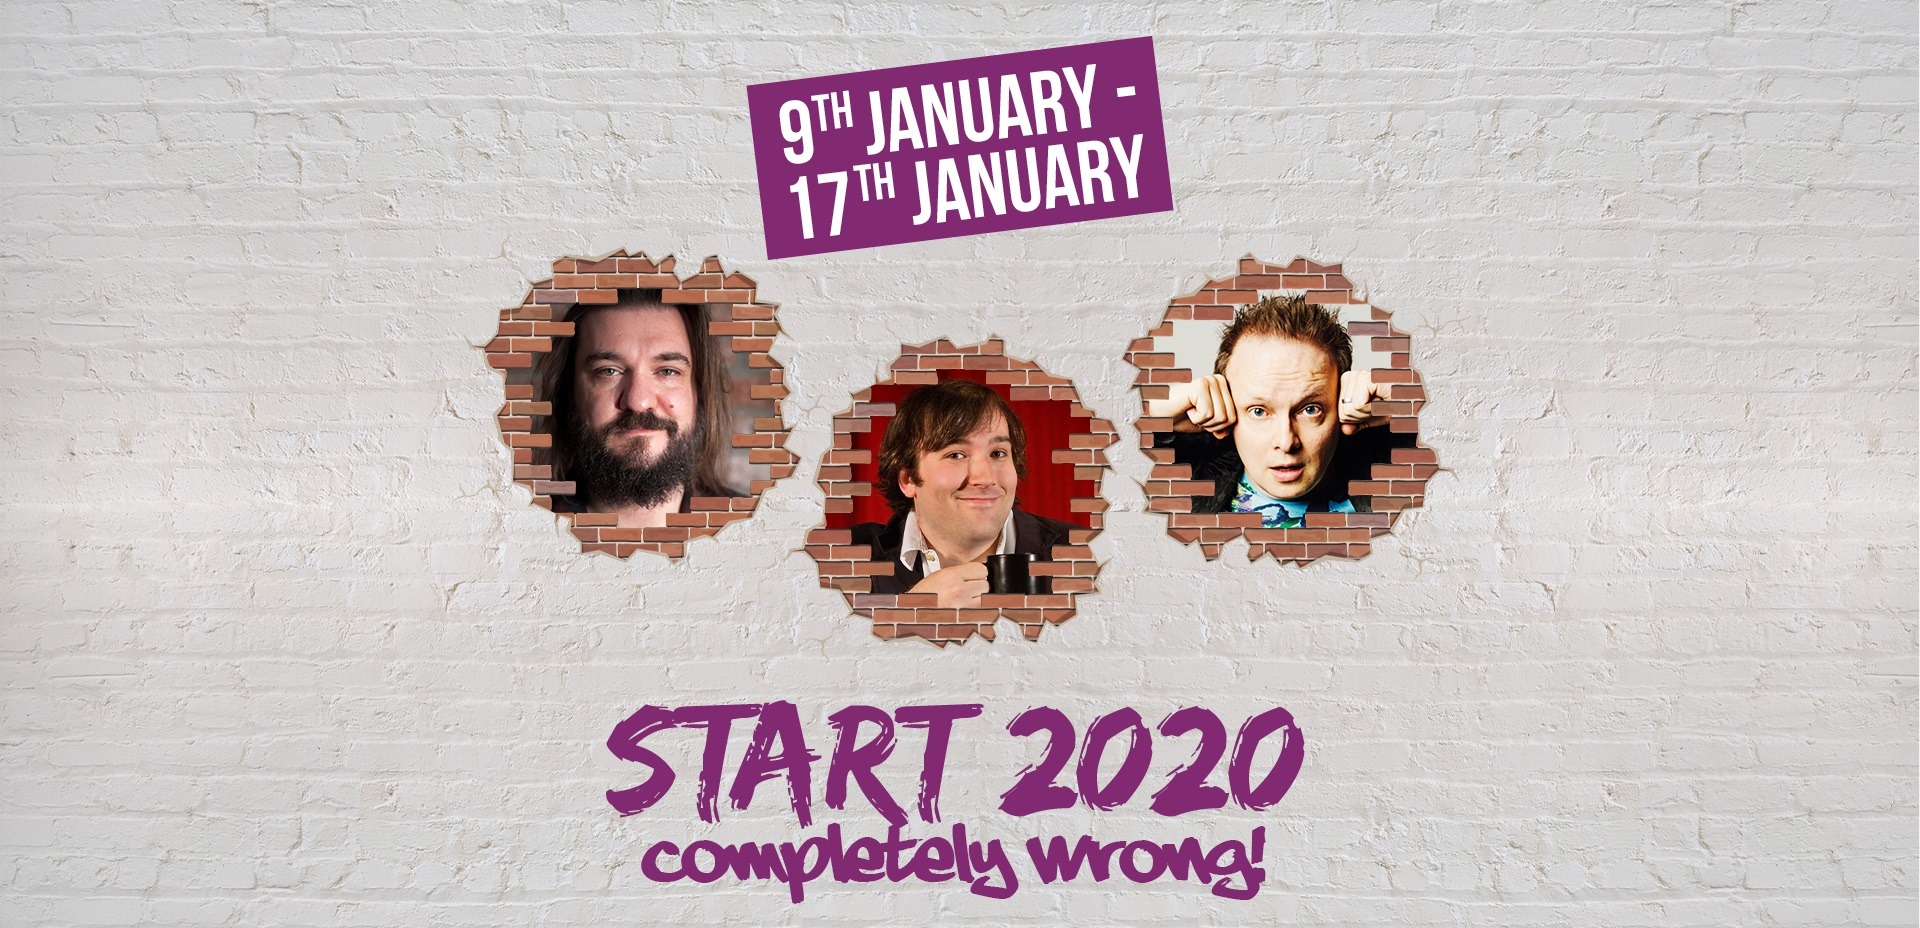 The Laughter Factory: “Start 2020 Completely Wrong!” - Coming Soon in UAE